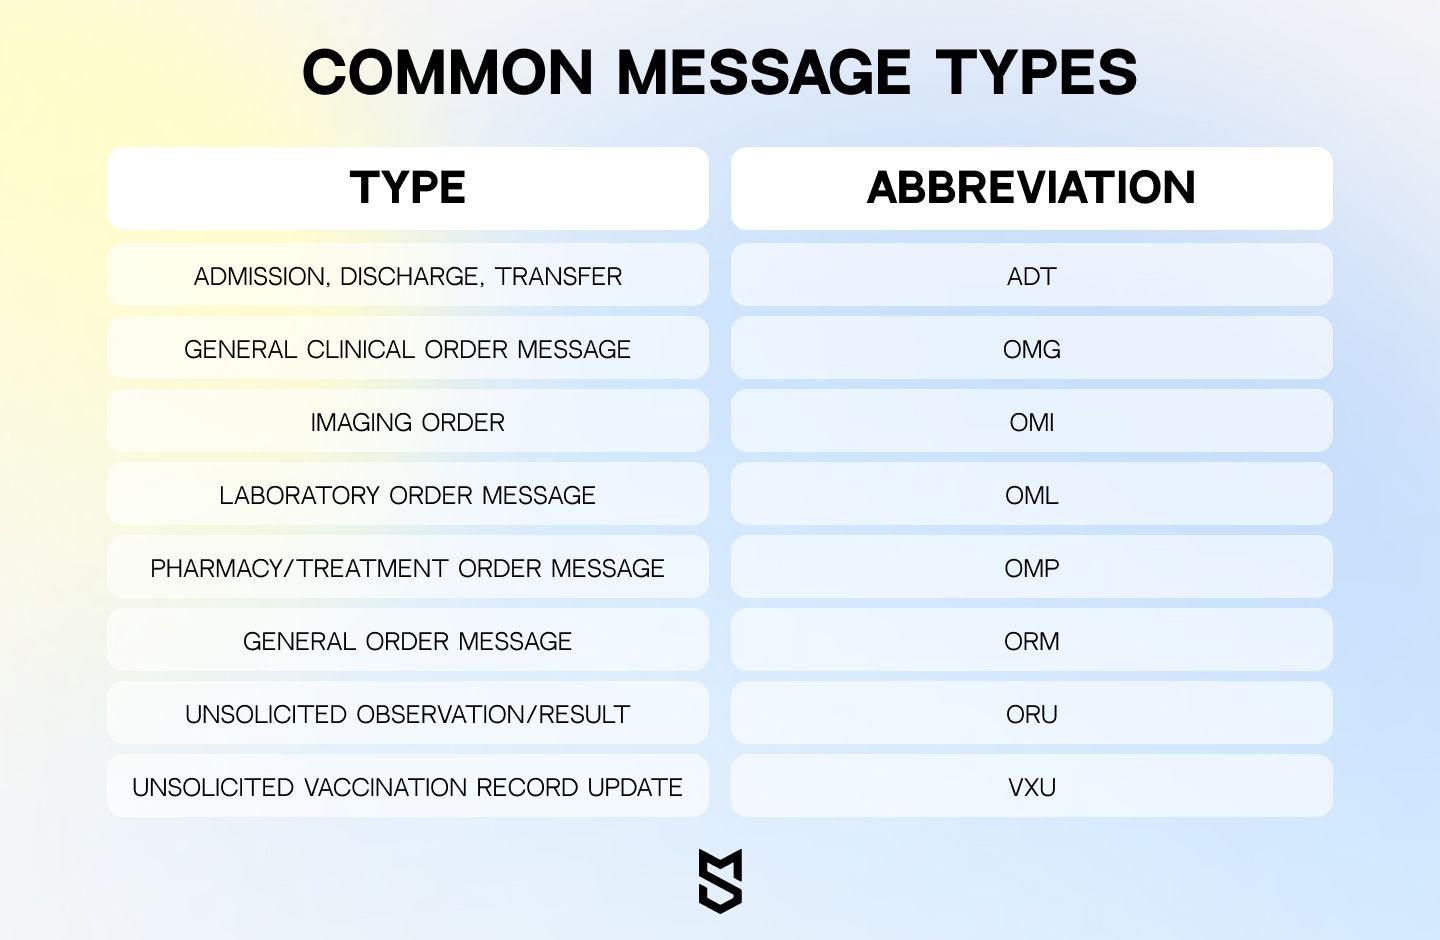 Common HL7 Message Types